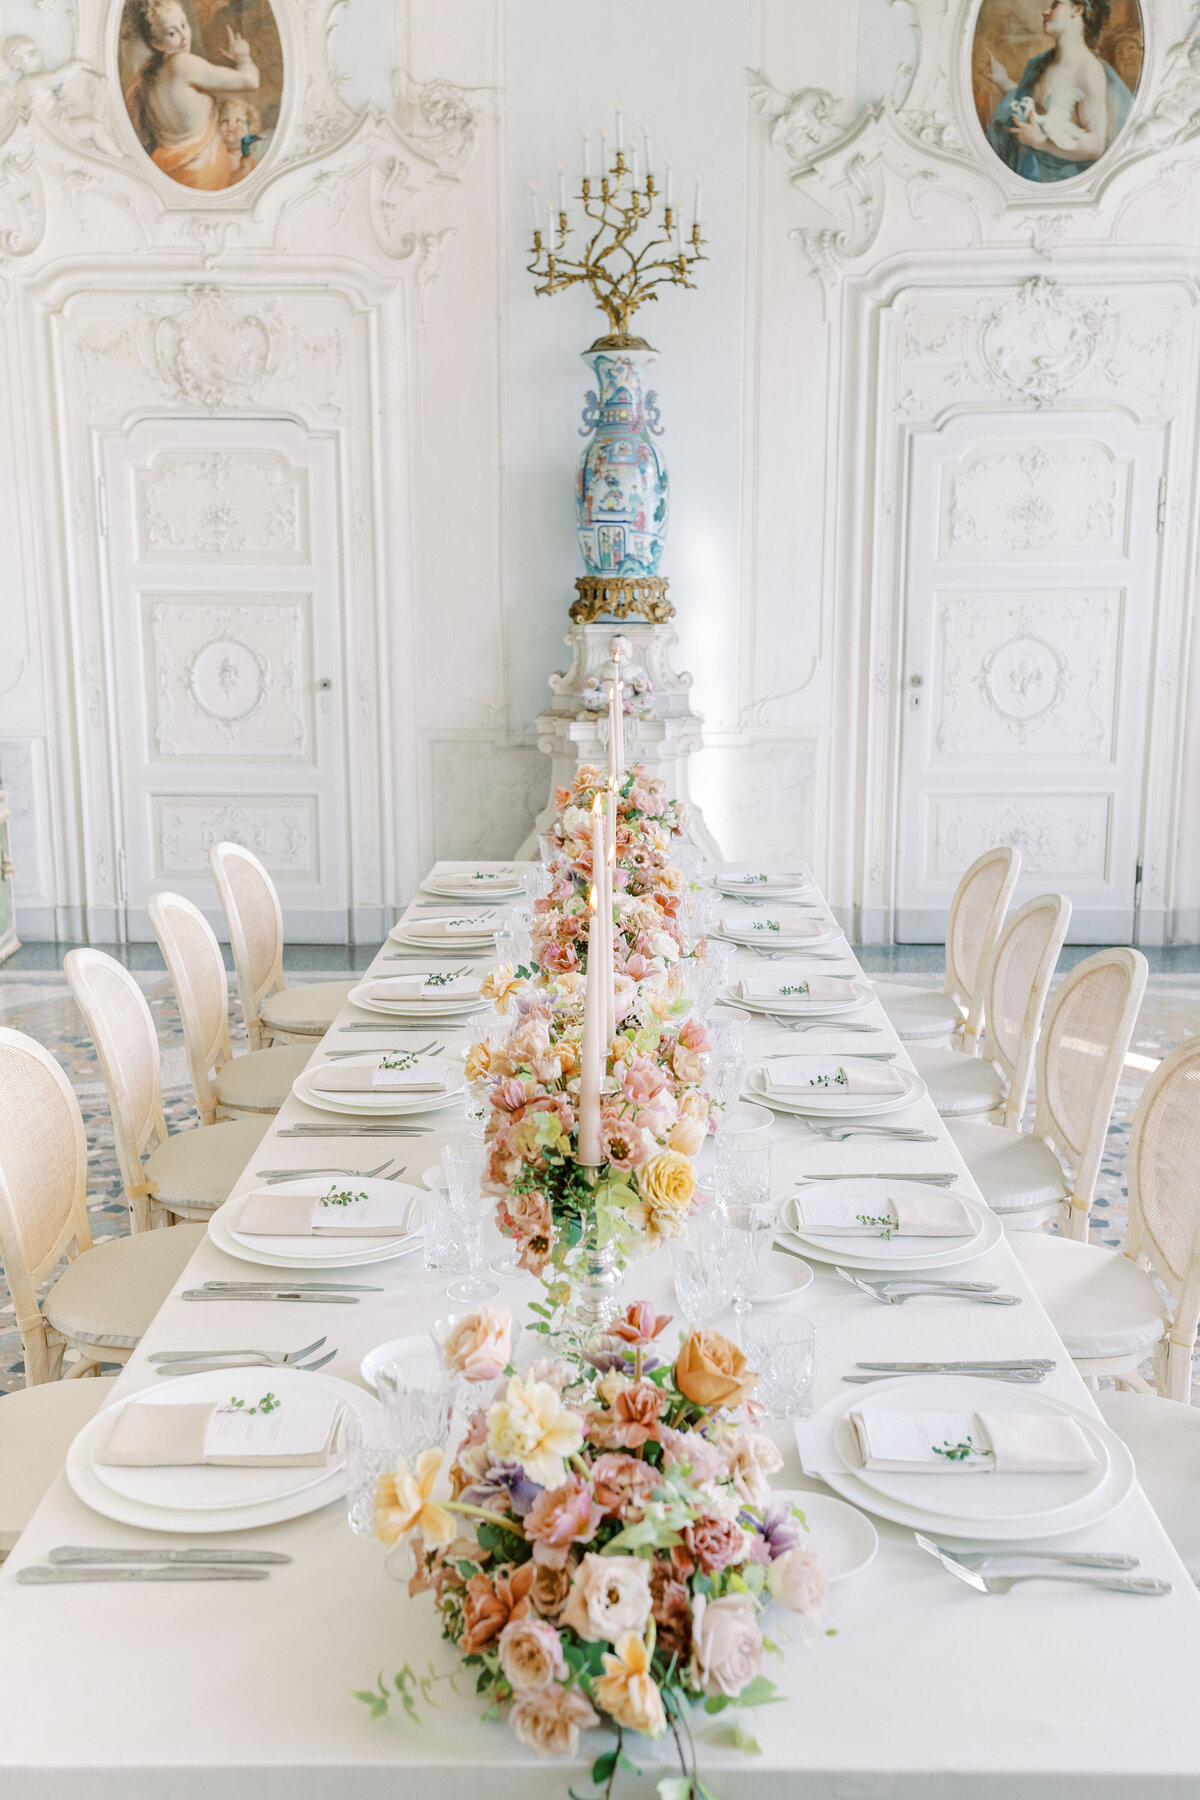 Villa Sola Cabiati wedding on Lake Como full of color and life photographed by Italy Wedding photographer